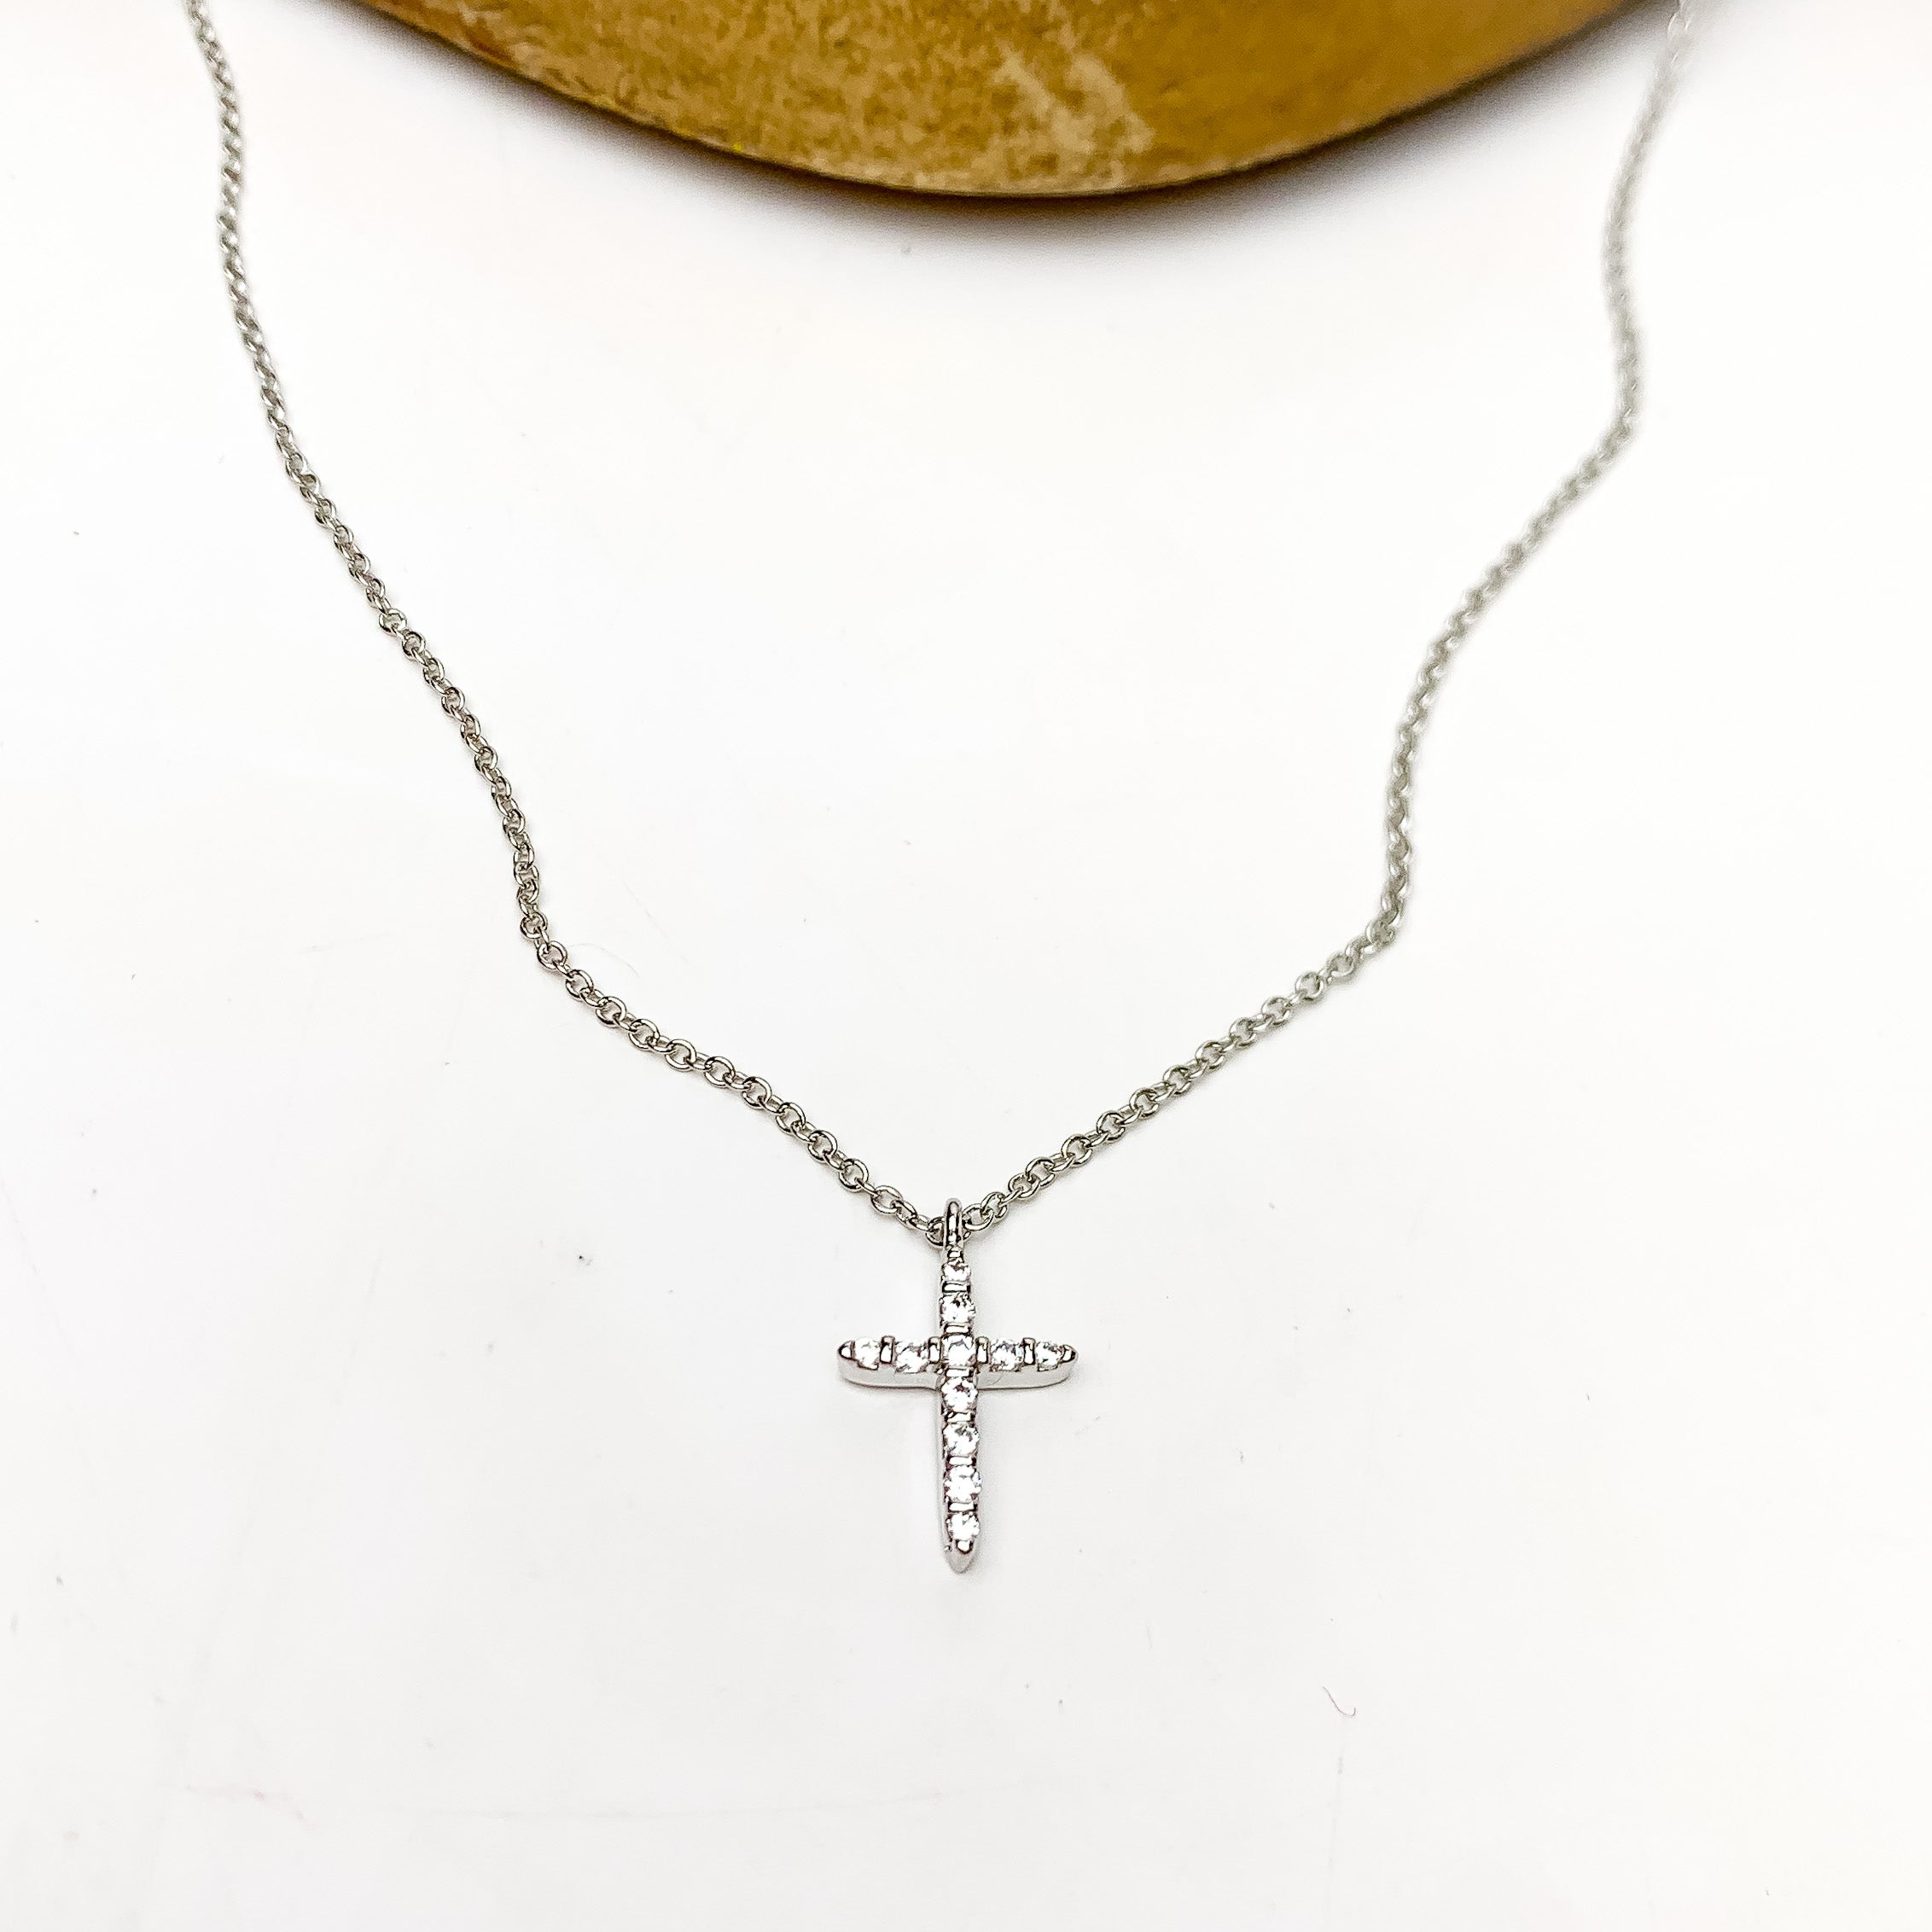 Silver Tone Glory Chain Necklace With Clear Crystal Cross